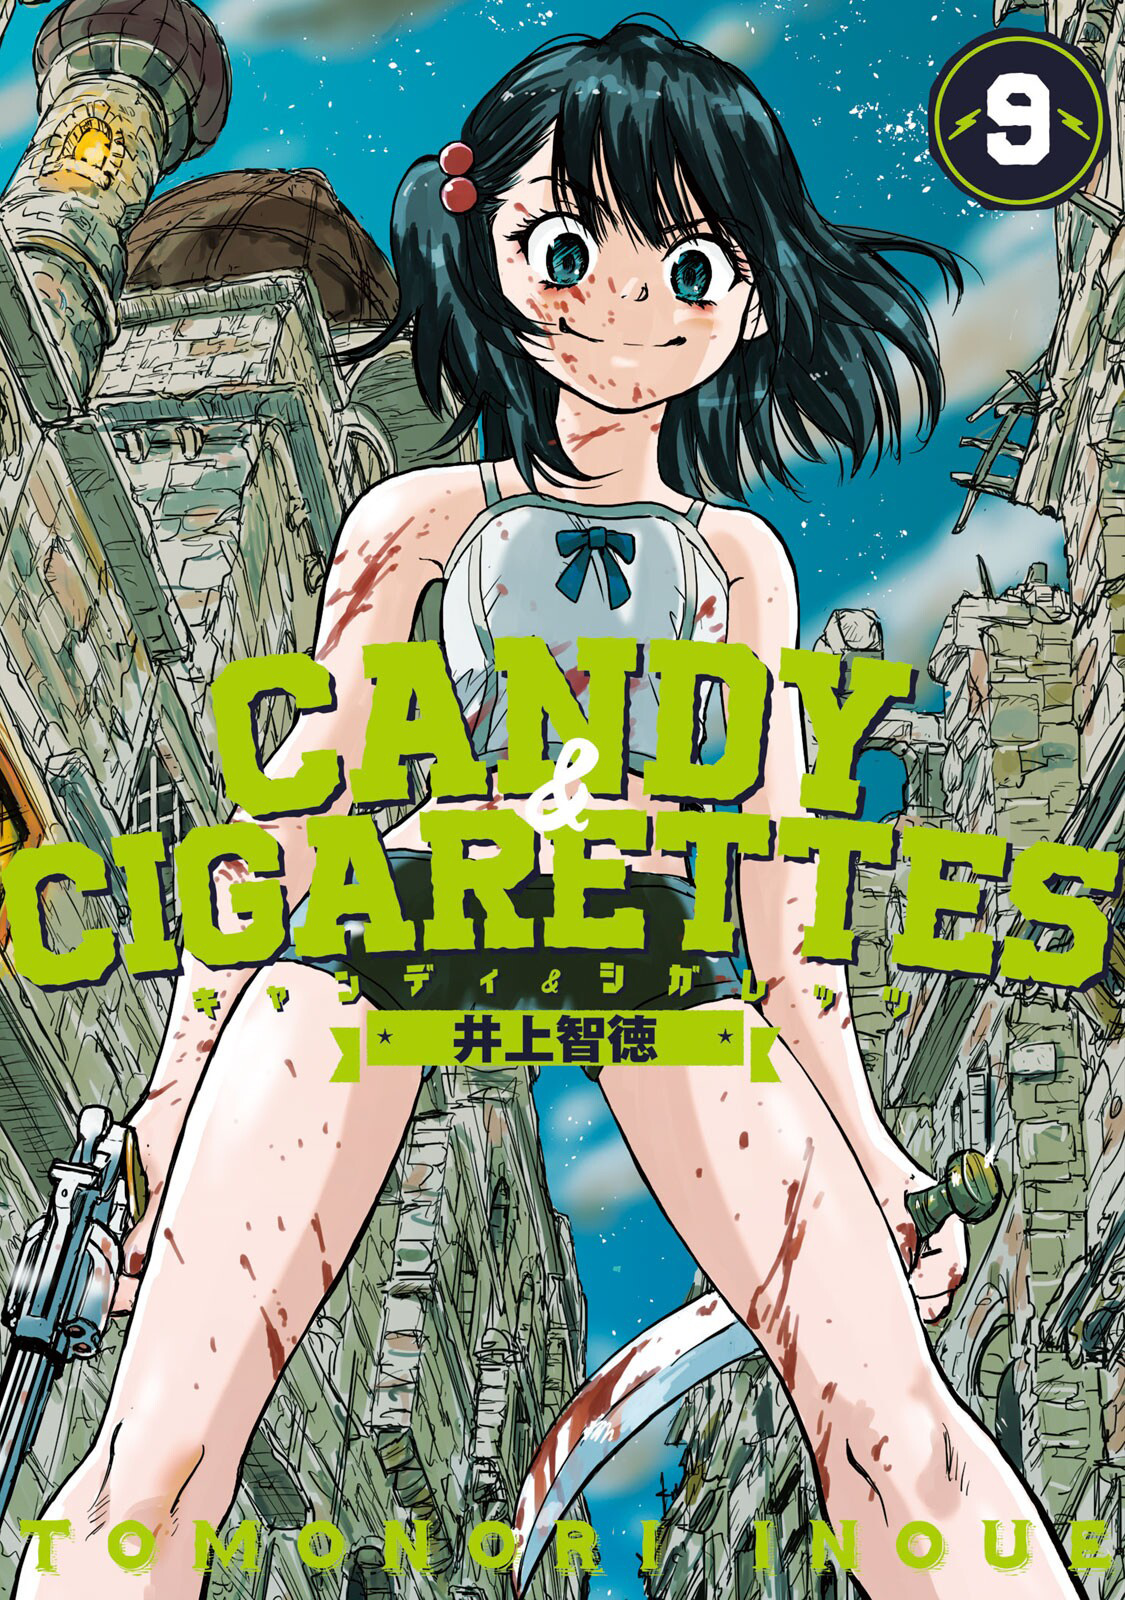 Candy & Cigarettes - Page 2